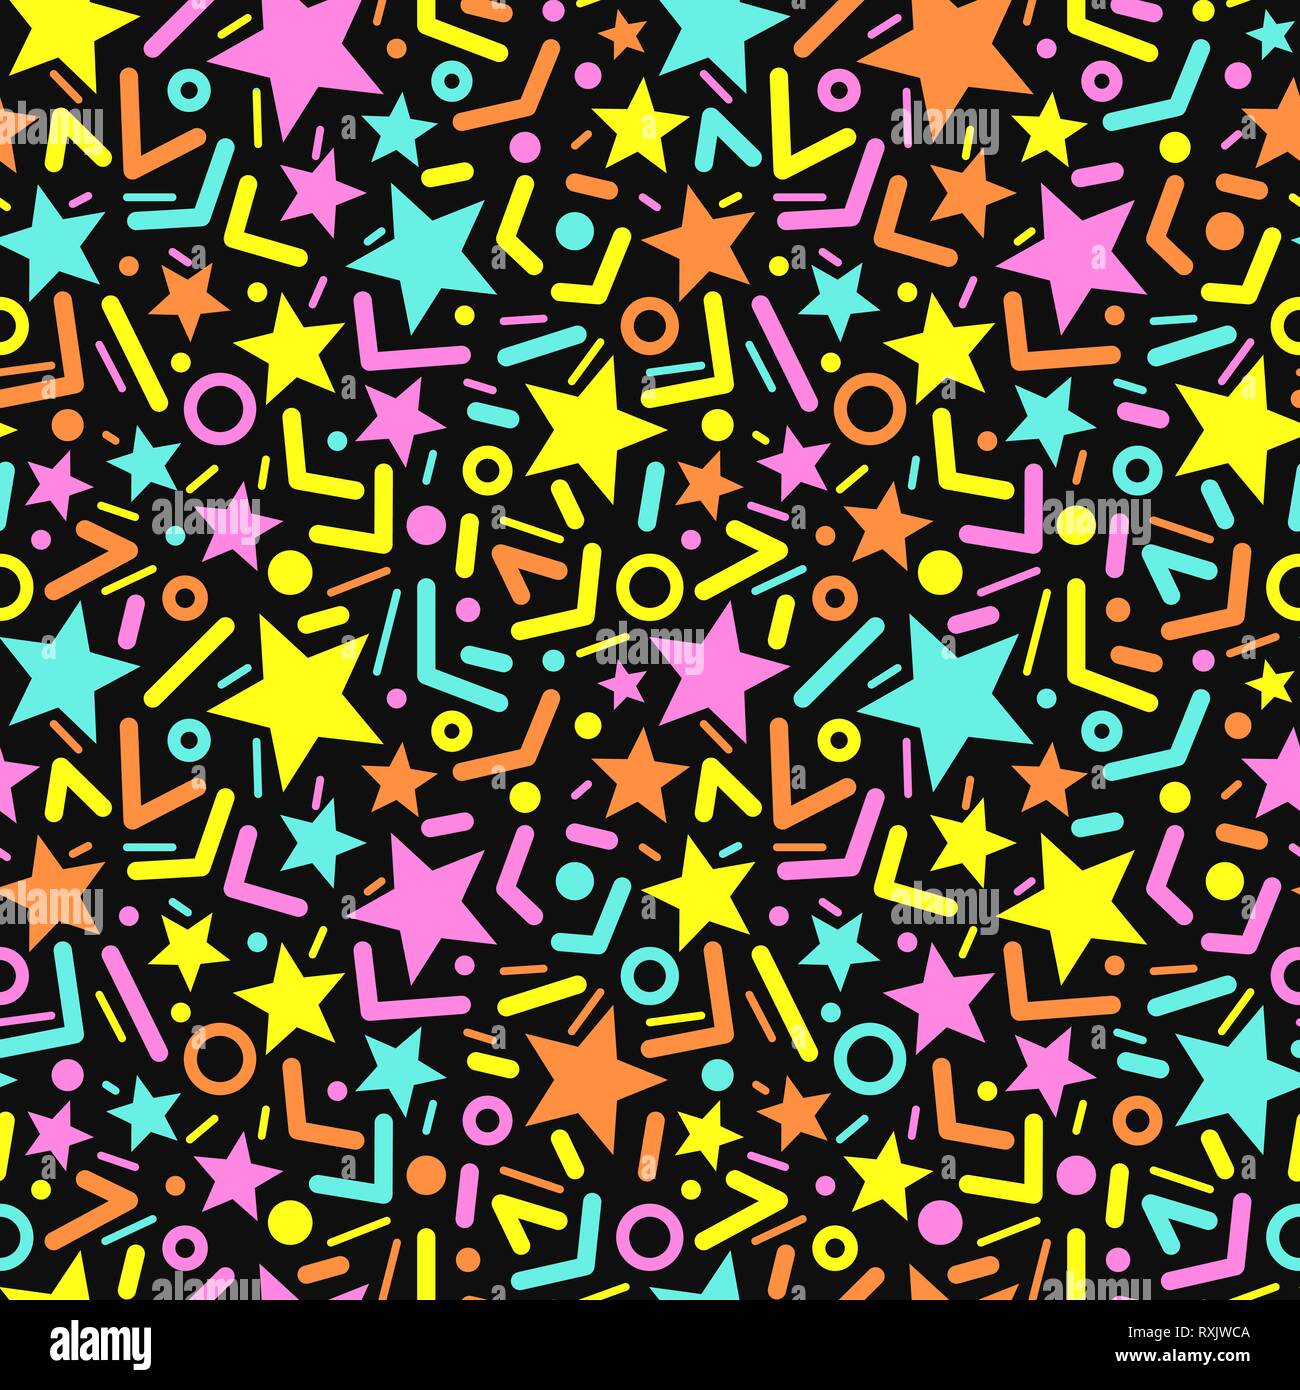 Vector pattern with stars. Stock Vector